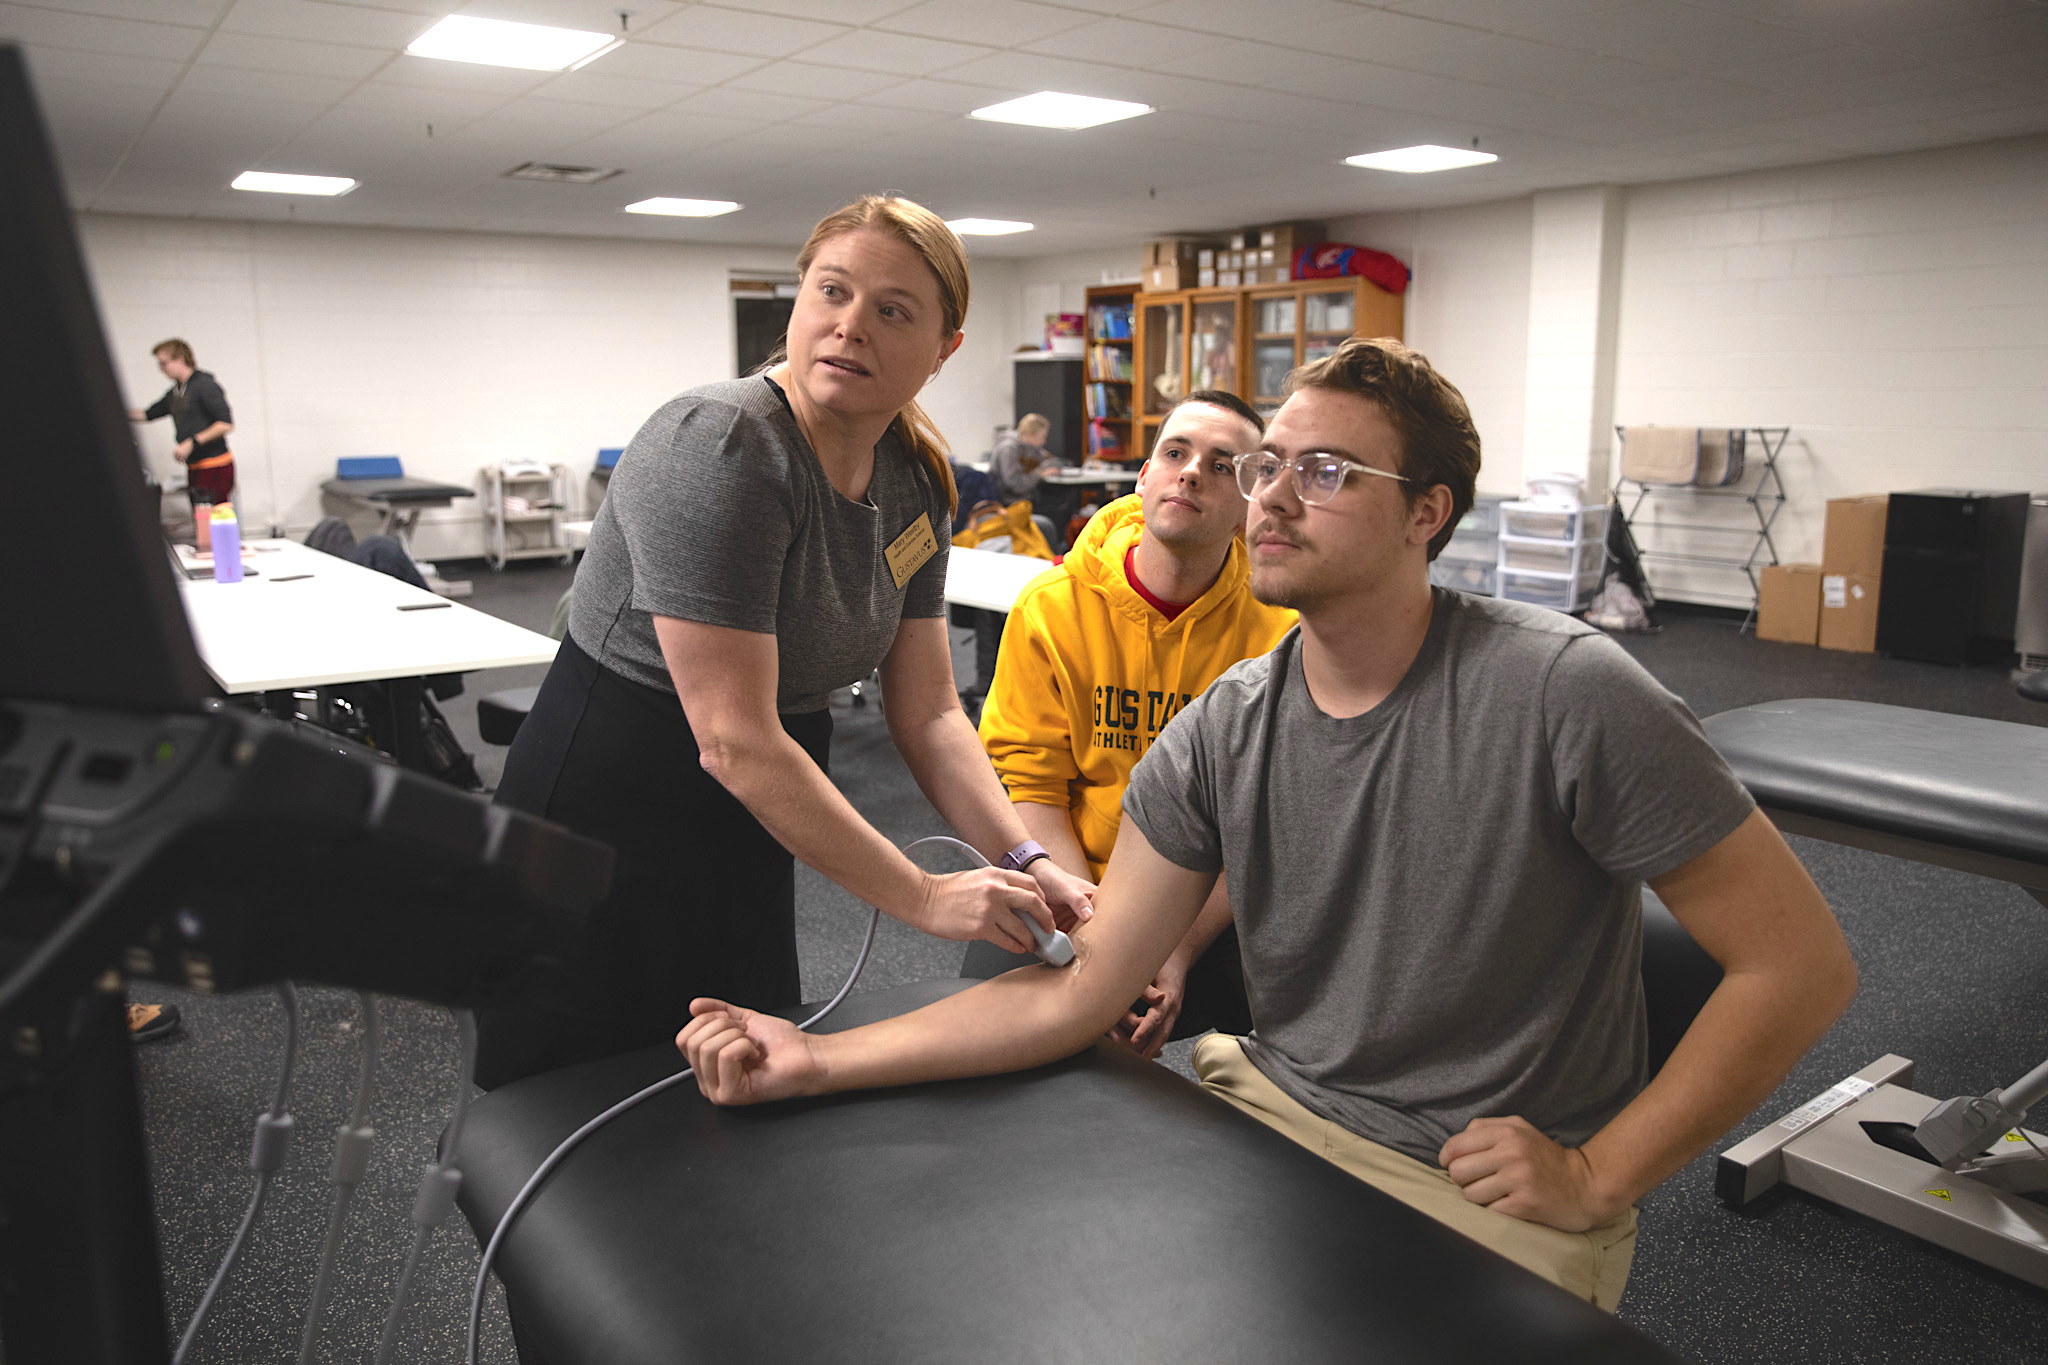 Mary Westby, director of the athletic training program at Gustavus Adolphus College, works with students.